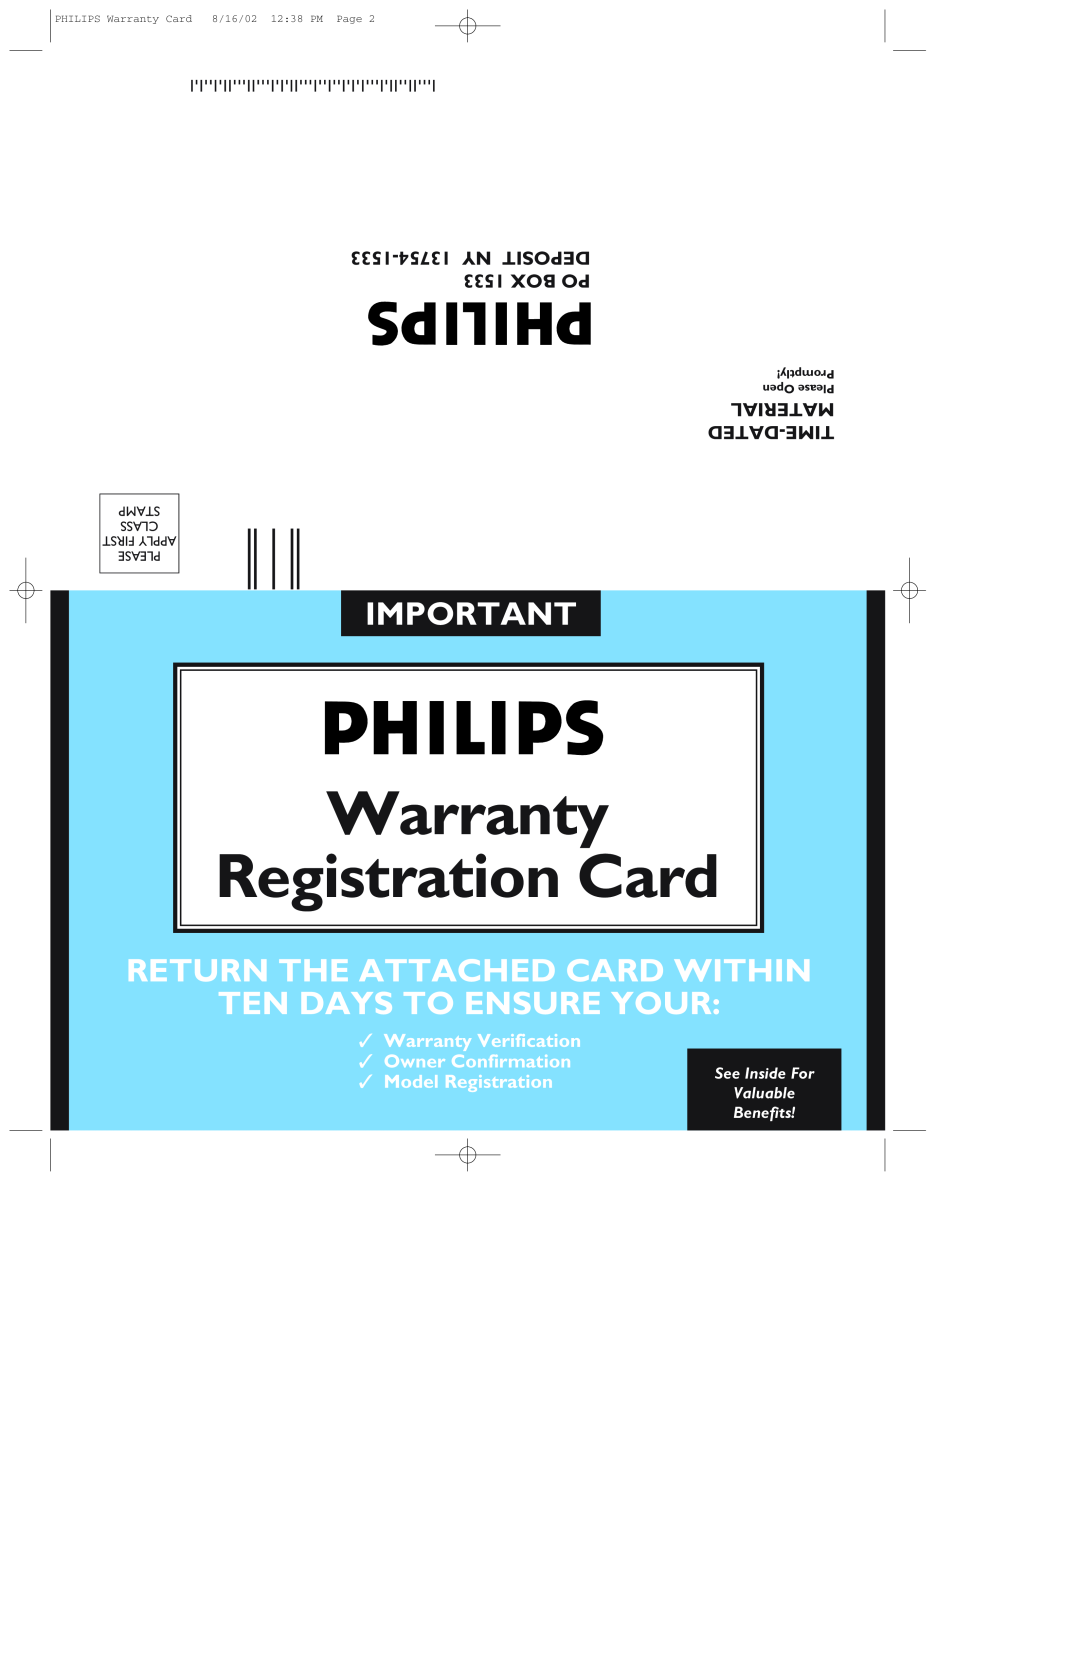 Philips 109E5 Ny Deposit, Box Po, Material, Dated-Time, Warranty, Registration Card, 1375415338, Stamp, Class, Please 